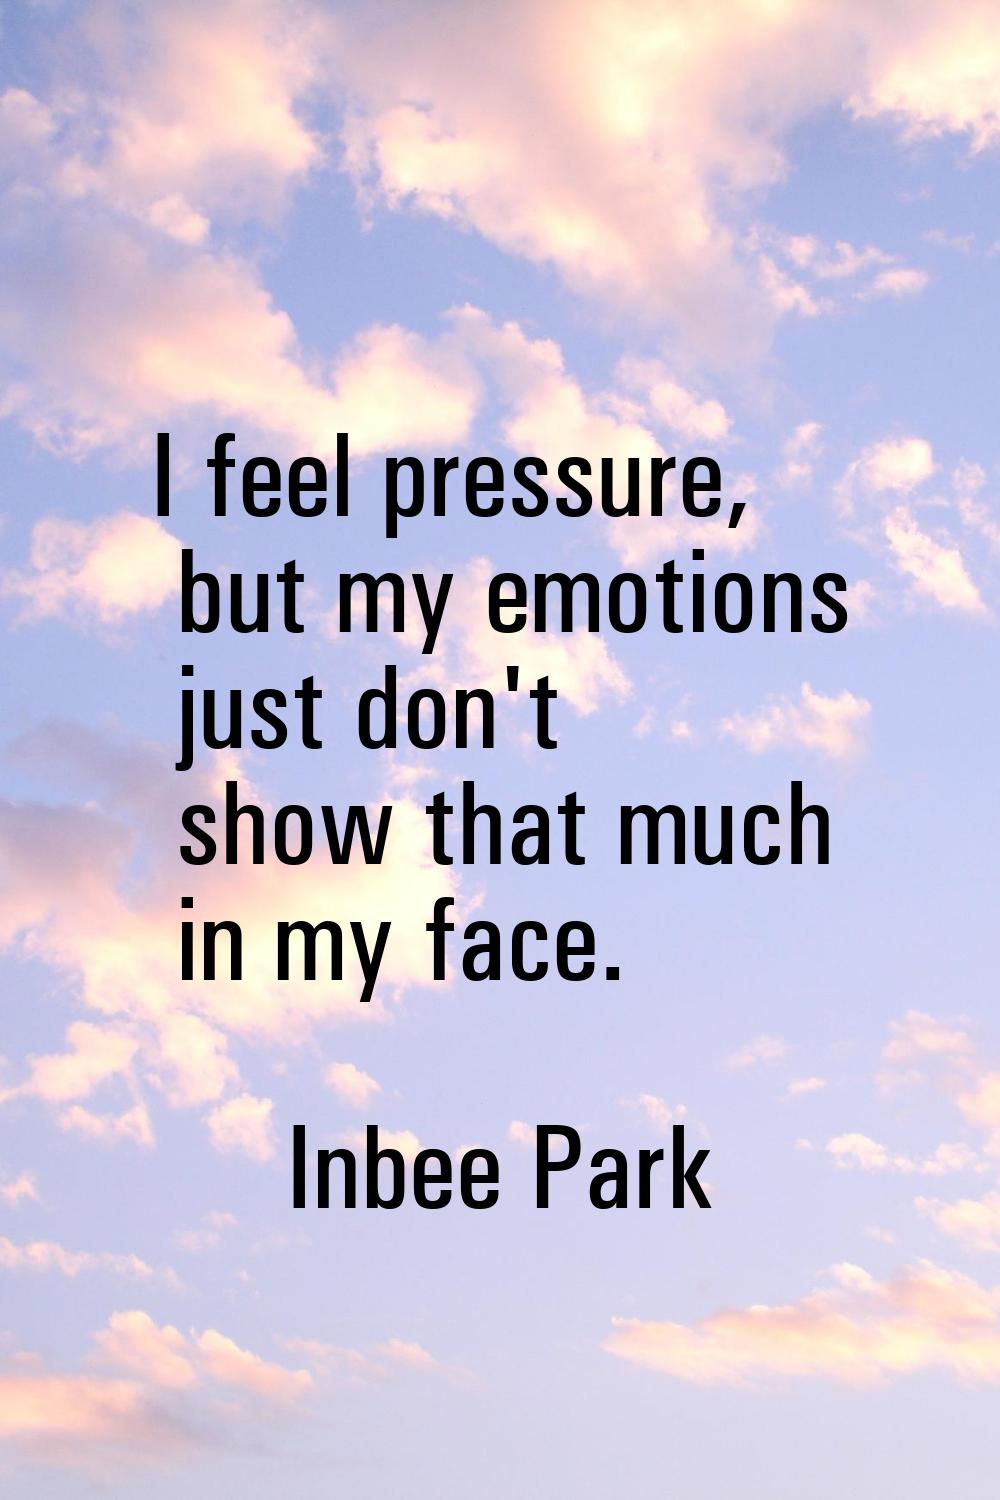 I feel pressure, but my emotions just don't show that much in my face.